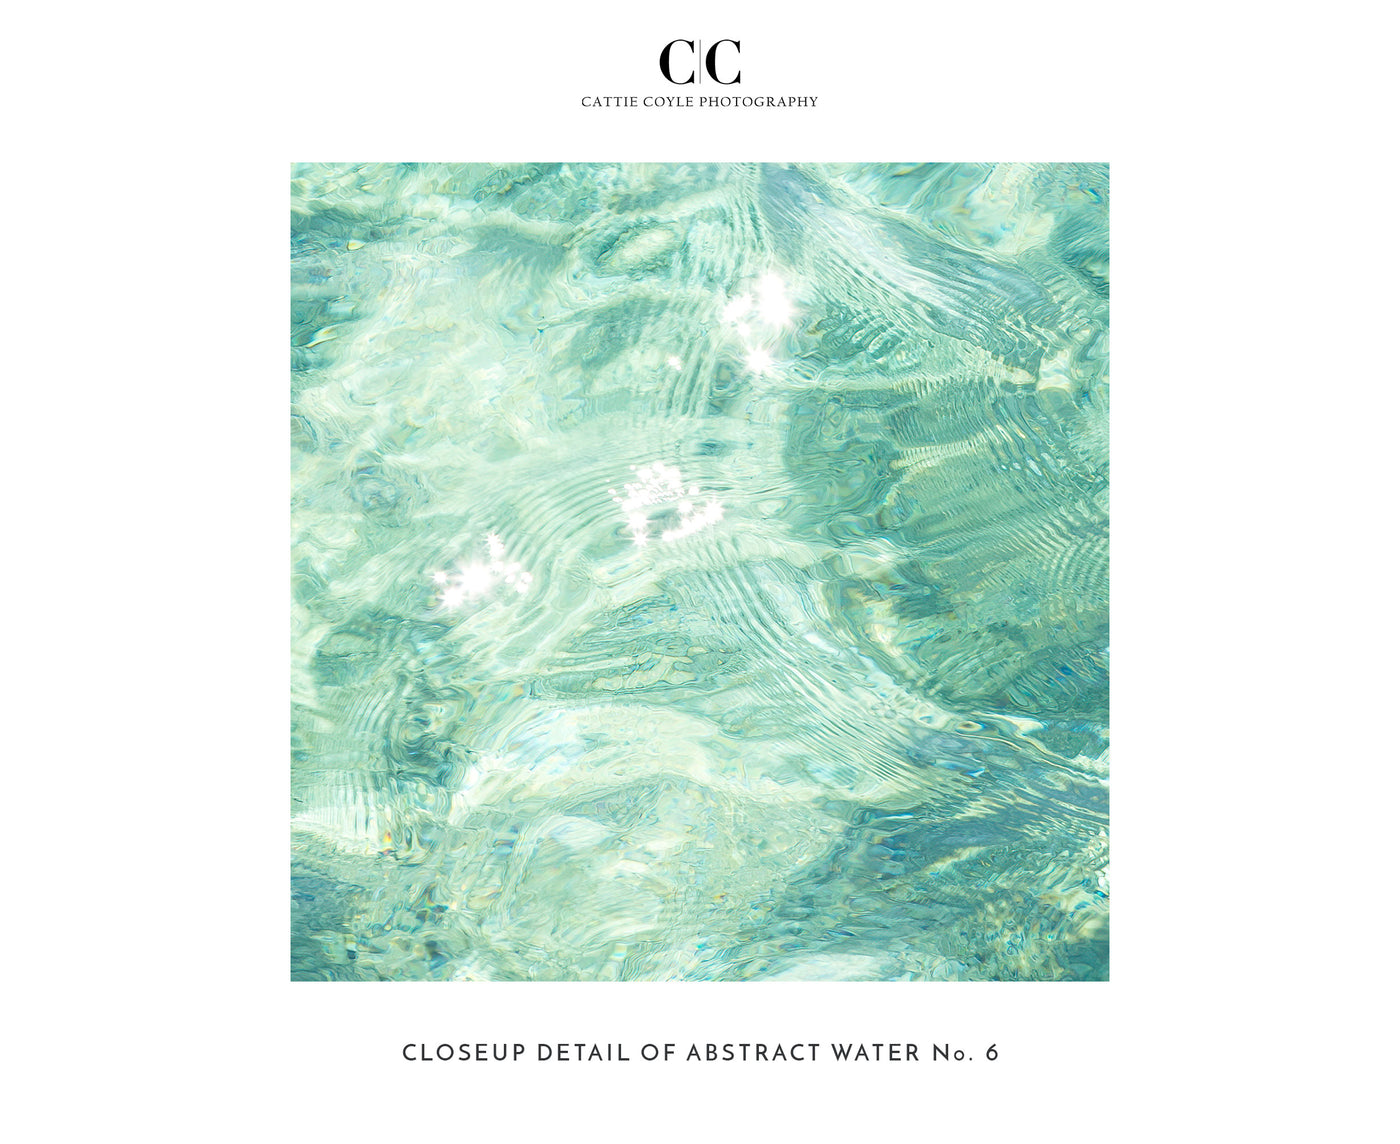 Abstract Water No 6 – Closeup detail of ocean art print by Cattie Coyle Photography